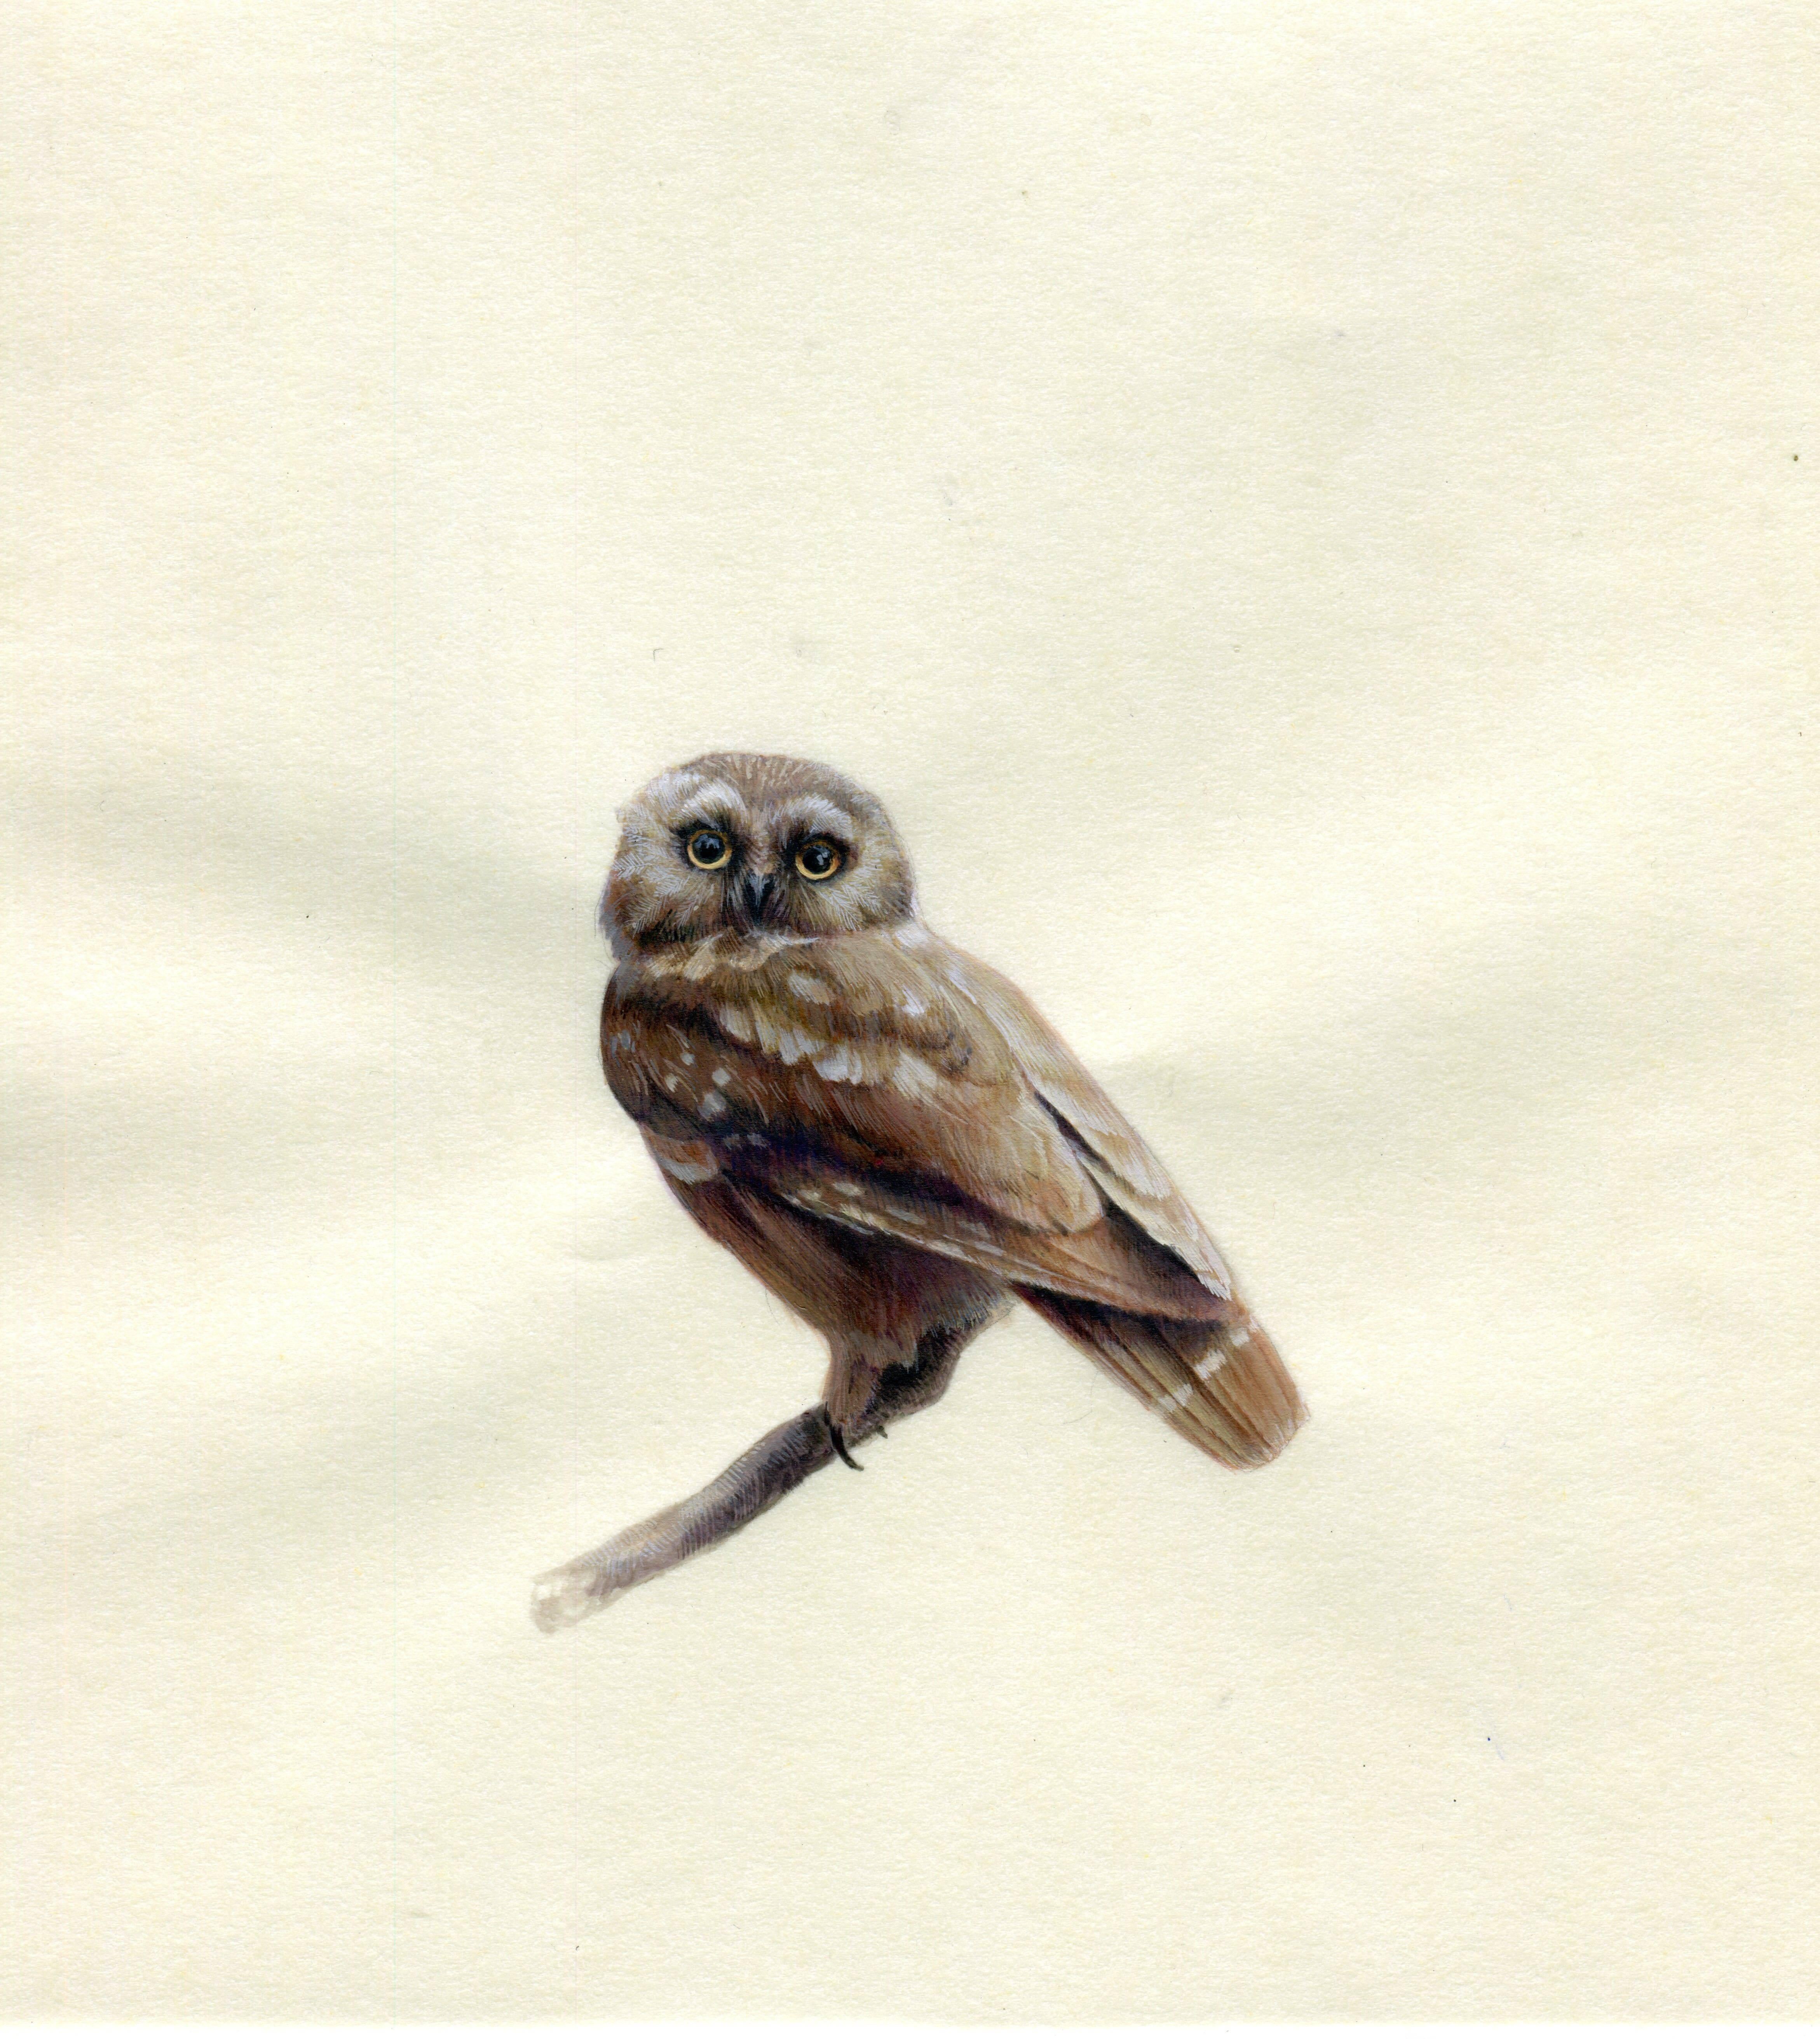 In her realist gouache on paper miniature, "Owl," 2018, Dina Brodsky imbues her subject with sensitivity. Brodsky's highly detailed treatment of the owl's plumage, particularly around its eyes, renders its face highly expressive, almost as if it